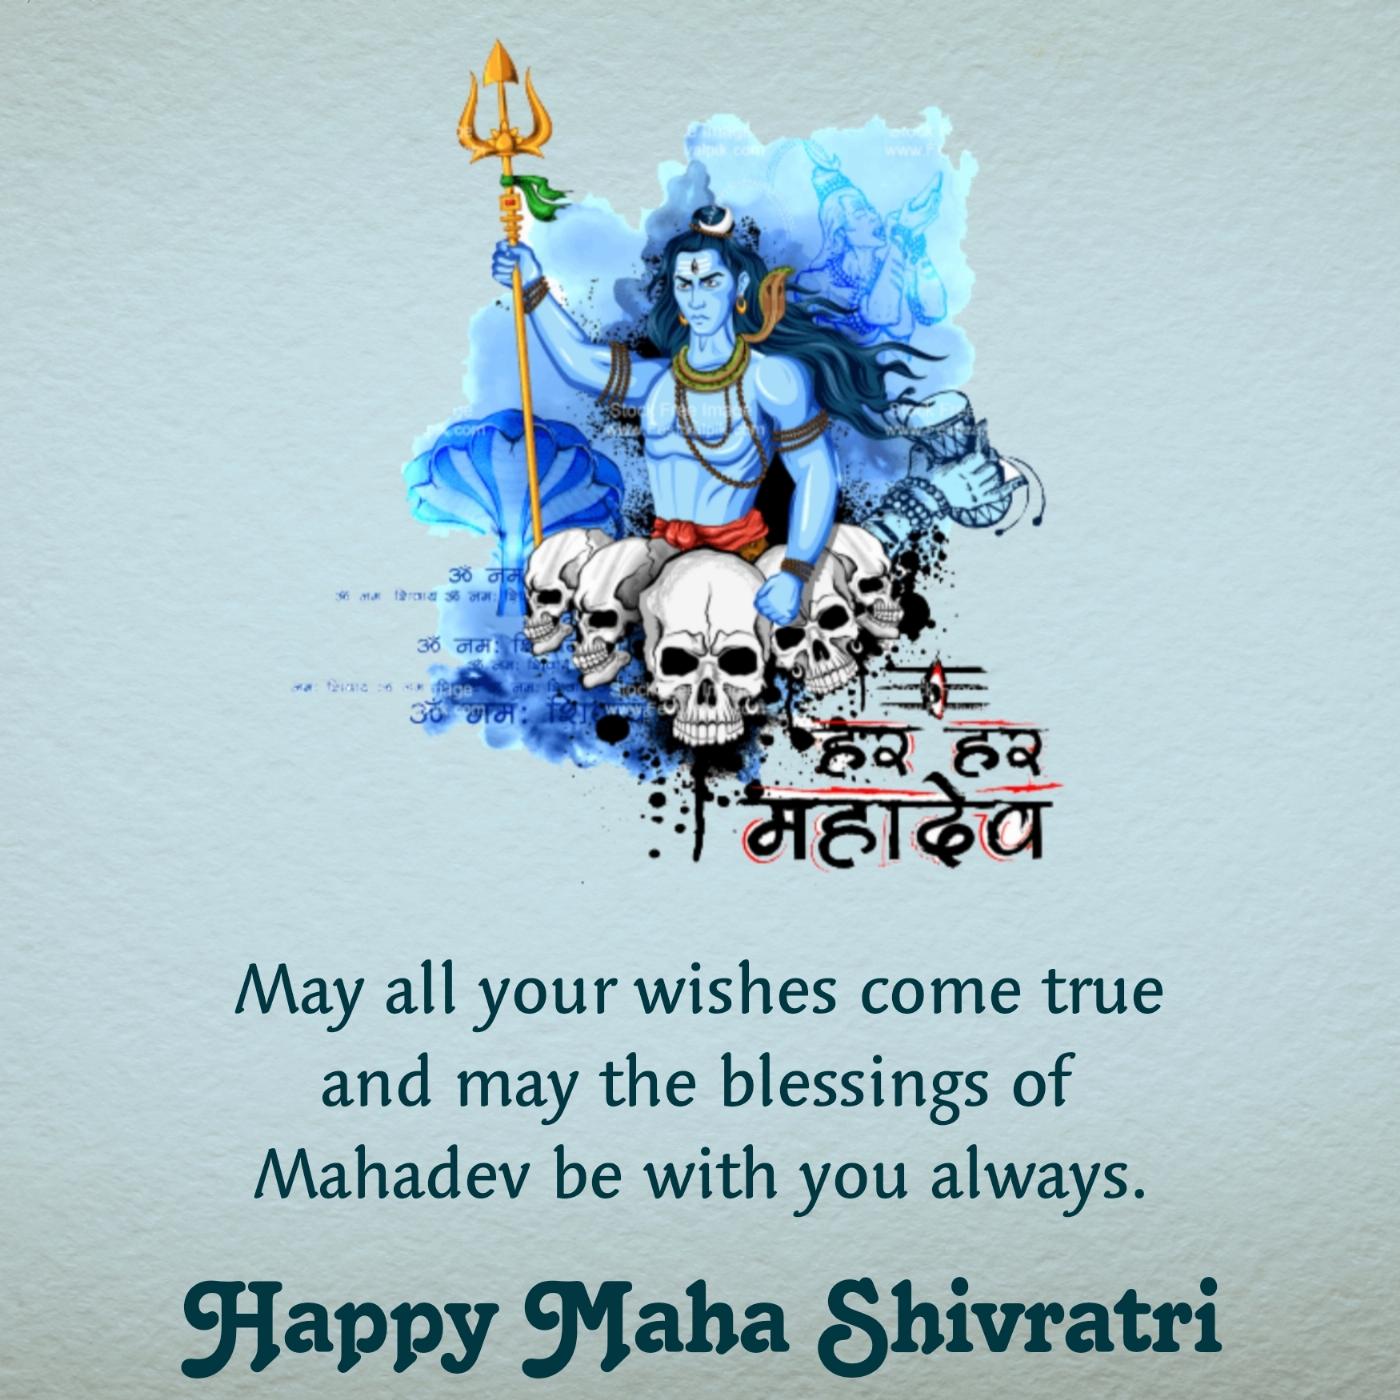 May all your wishes come true and may the blessings of Mahadev